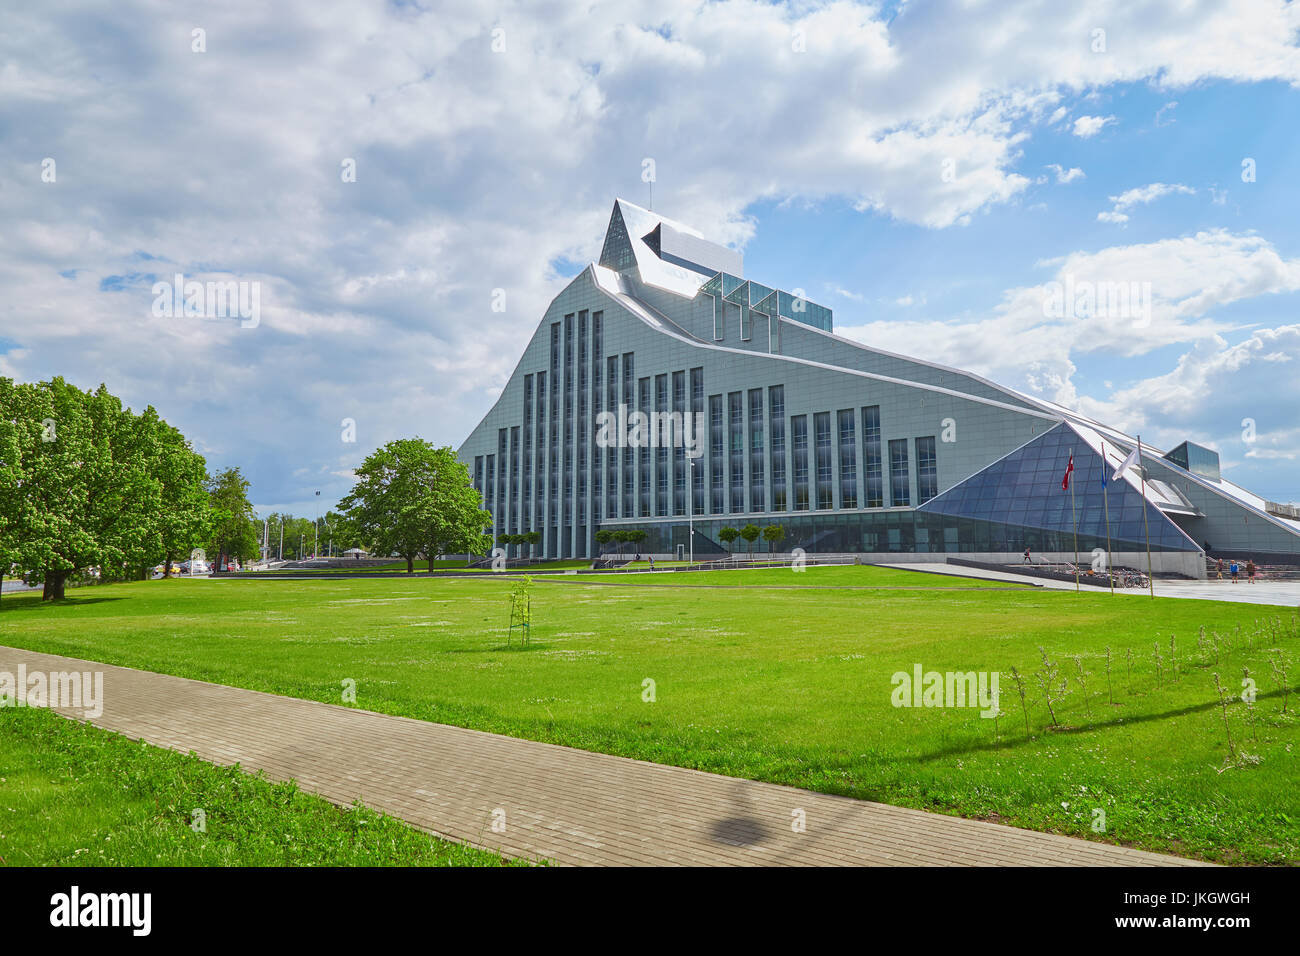 The building of the National Library of Latvia in Riga on a summer sunny day Stock Photo